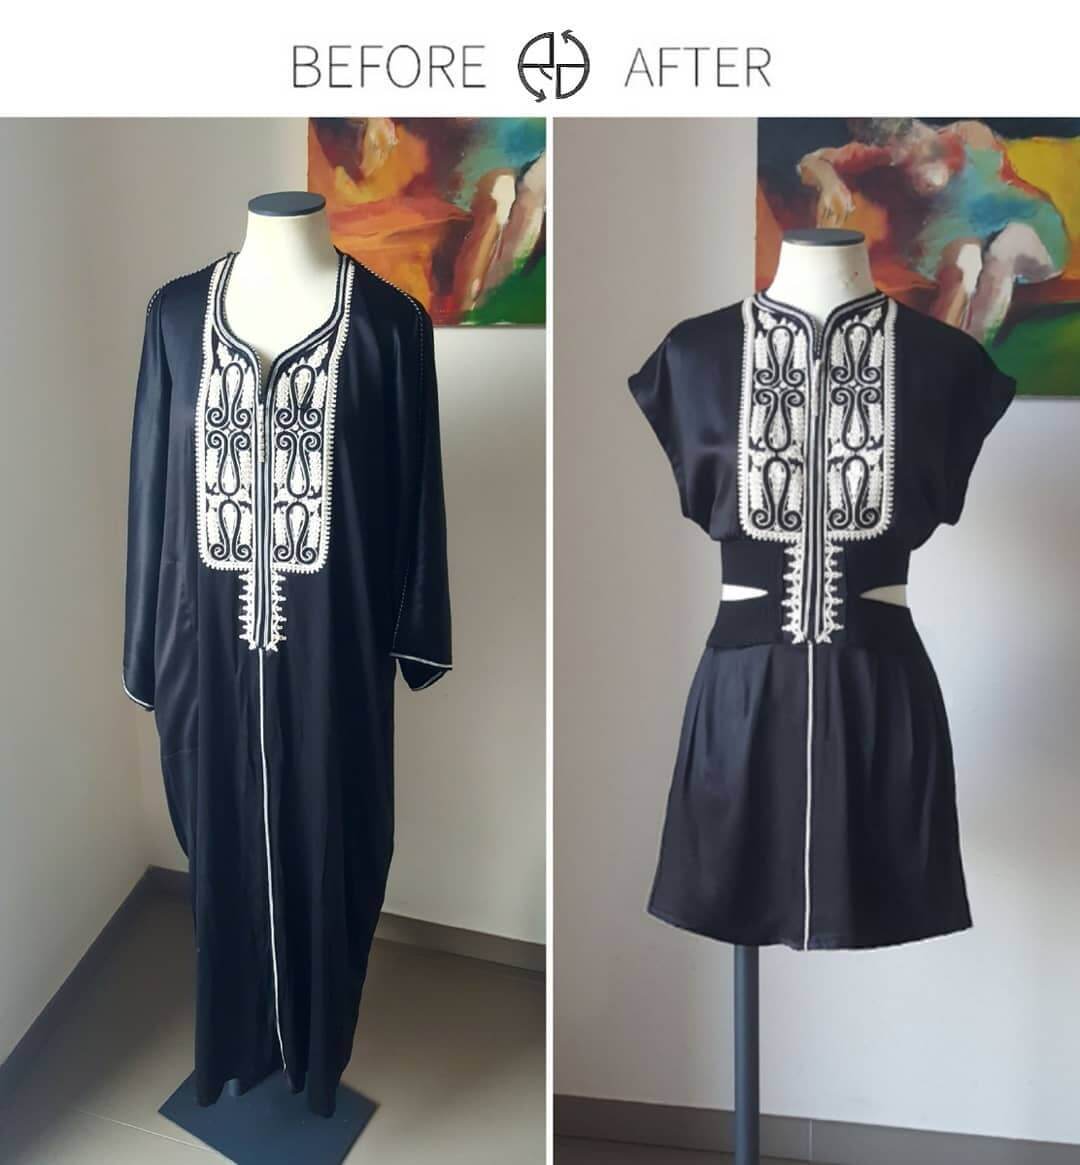 DIY Ideas To Transform Old Clothes Revamp An Old Gown By Cutting It Short